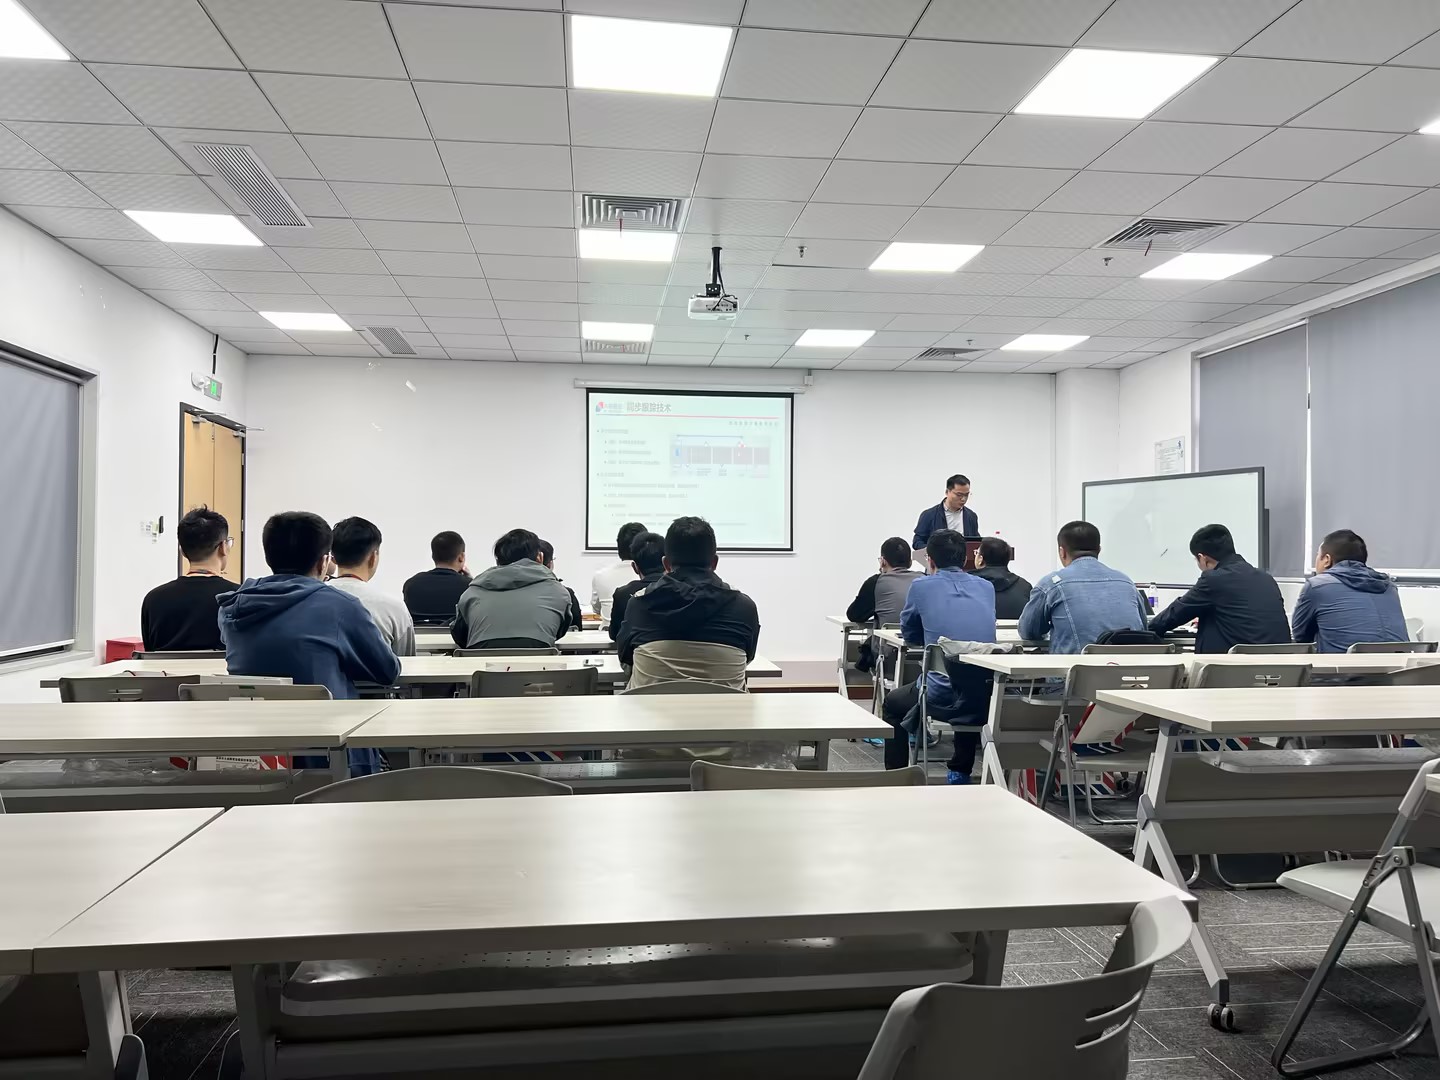 Working together to achieve win-win cooperation – Dacheng Precision organized a series of customer training